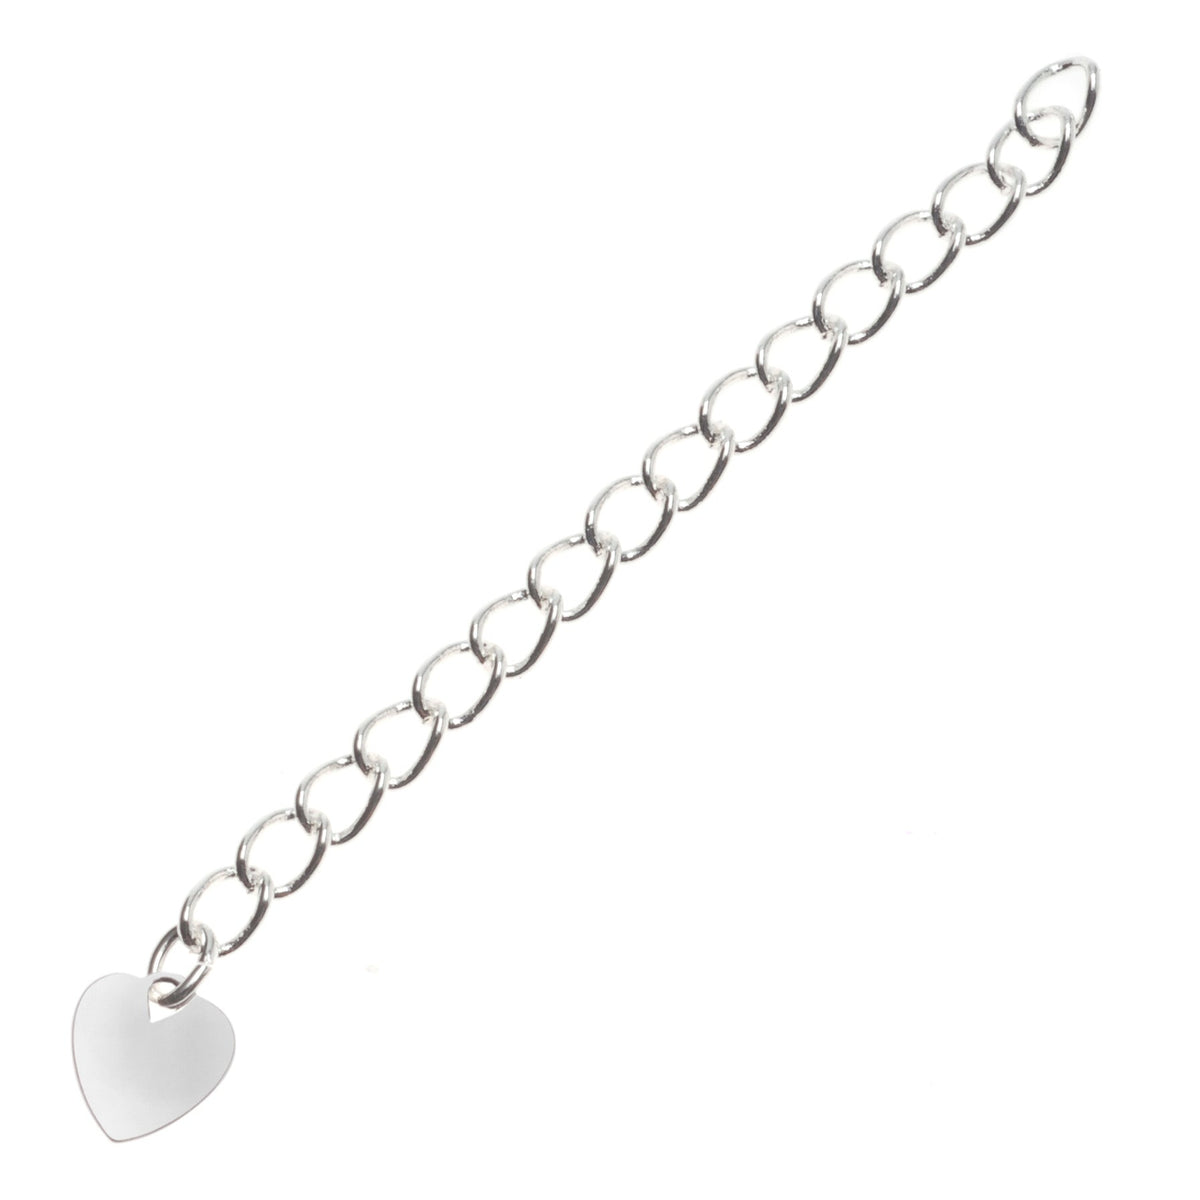 Necklace Extender Chain - 3 inch – Wild Moonstone